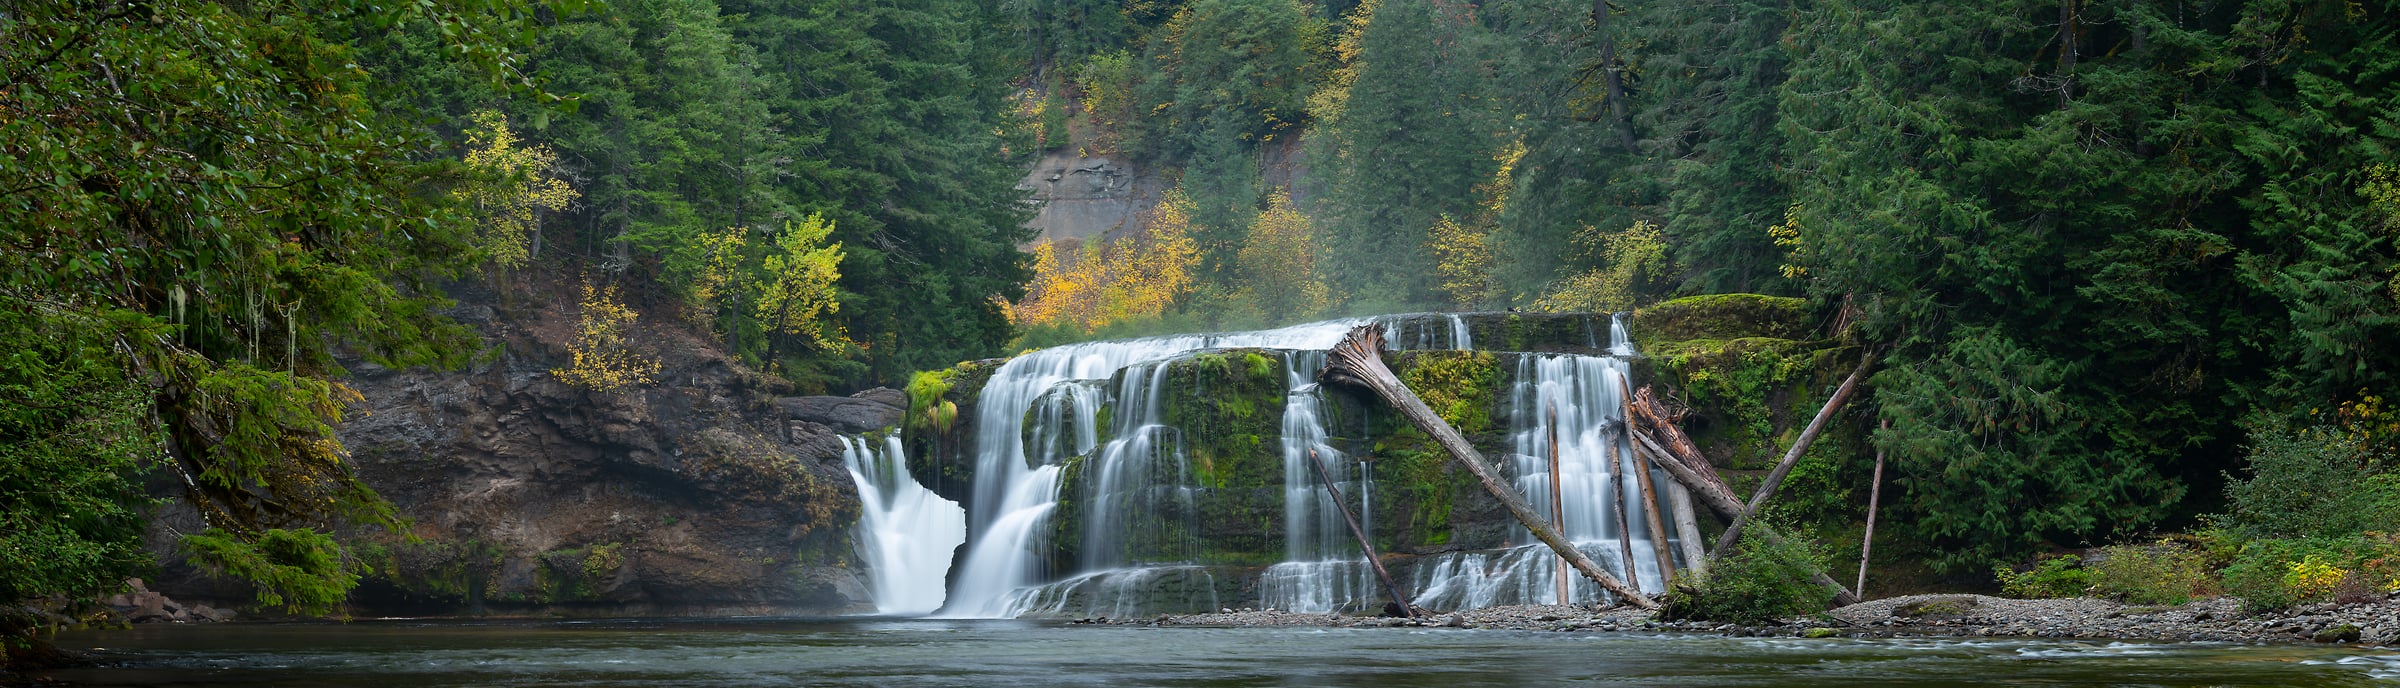 270 megapixels! A very high resolution, wide waterfall panorama photo; photograph created by Greg Probst in Gifford Pinchot National Forest, Washington.